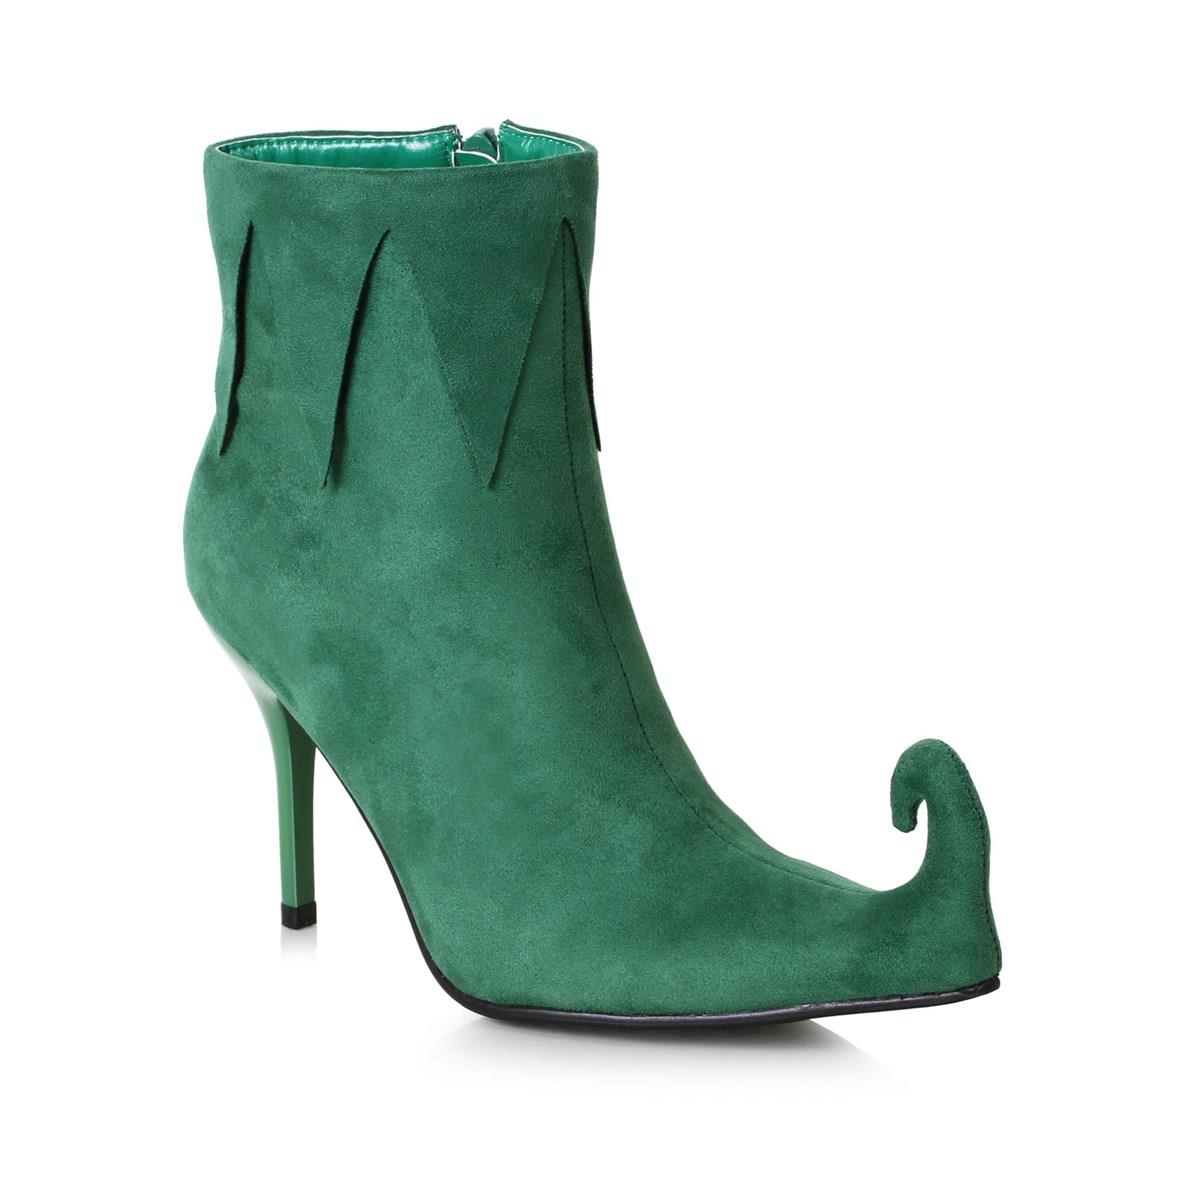 276412 3 in. Womens Heel Holiday Boot, Green - Size 9